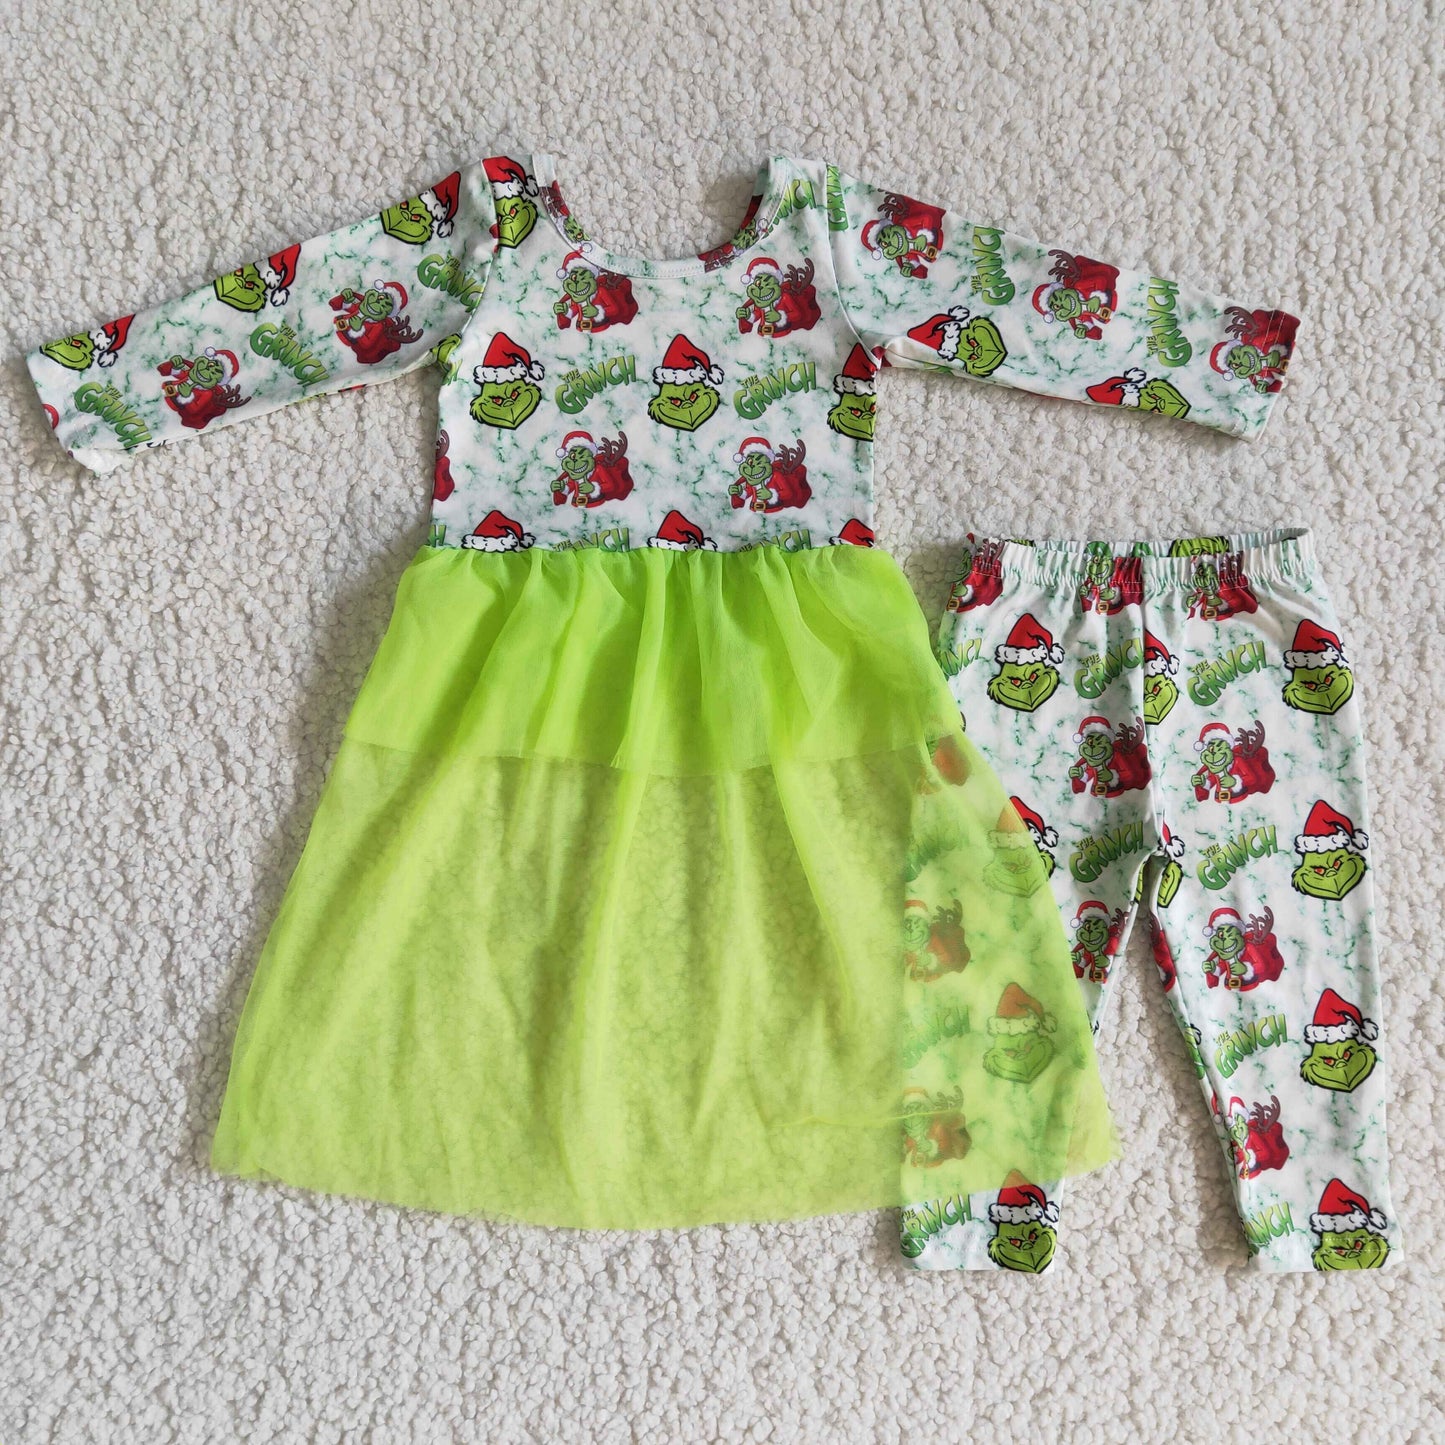 Grinch Outfit With Green Tutu